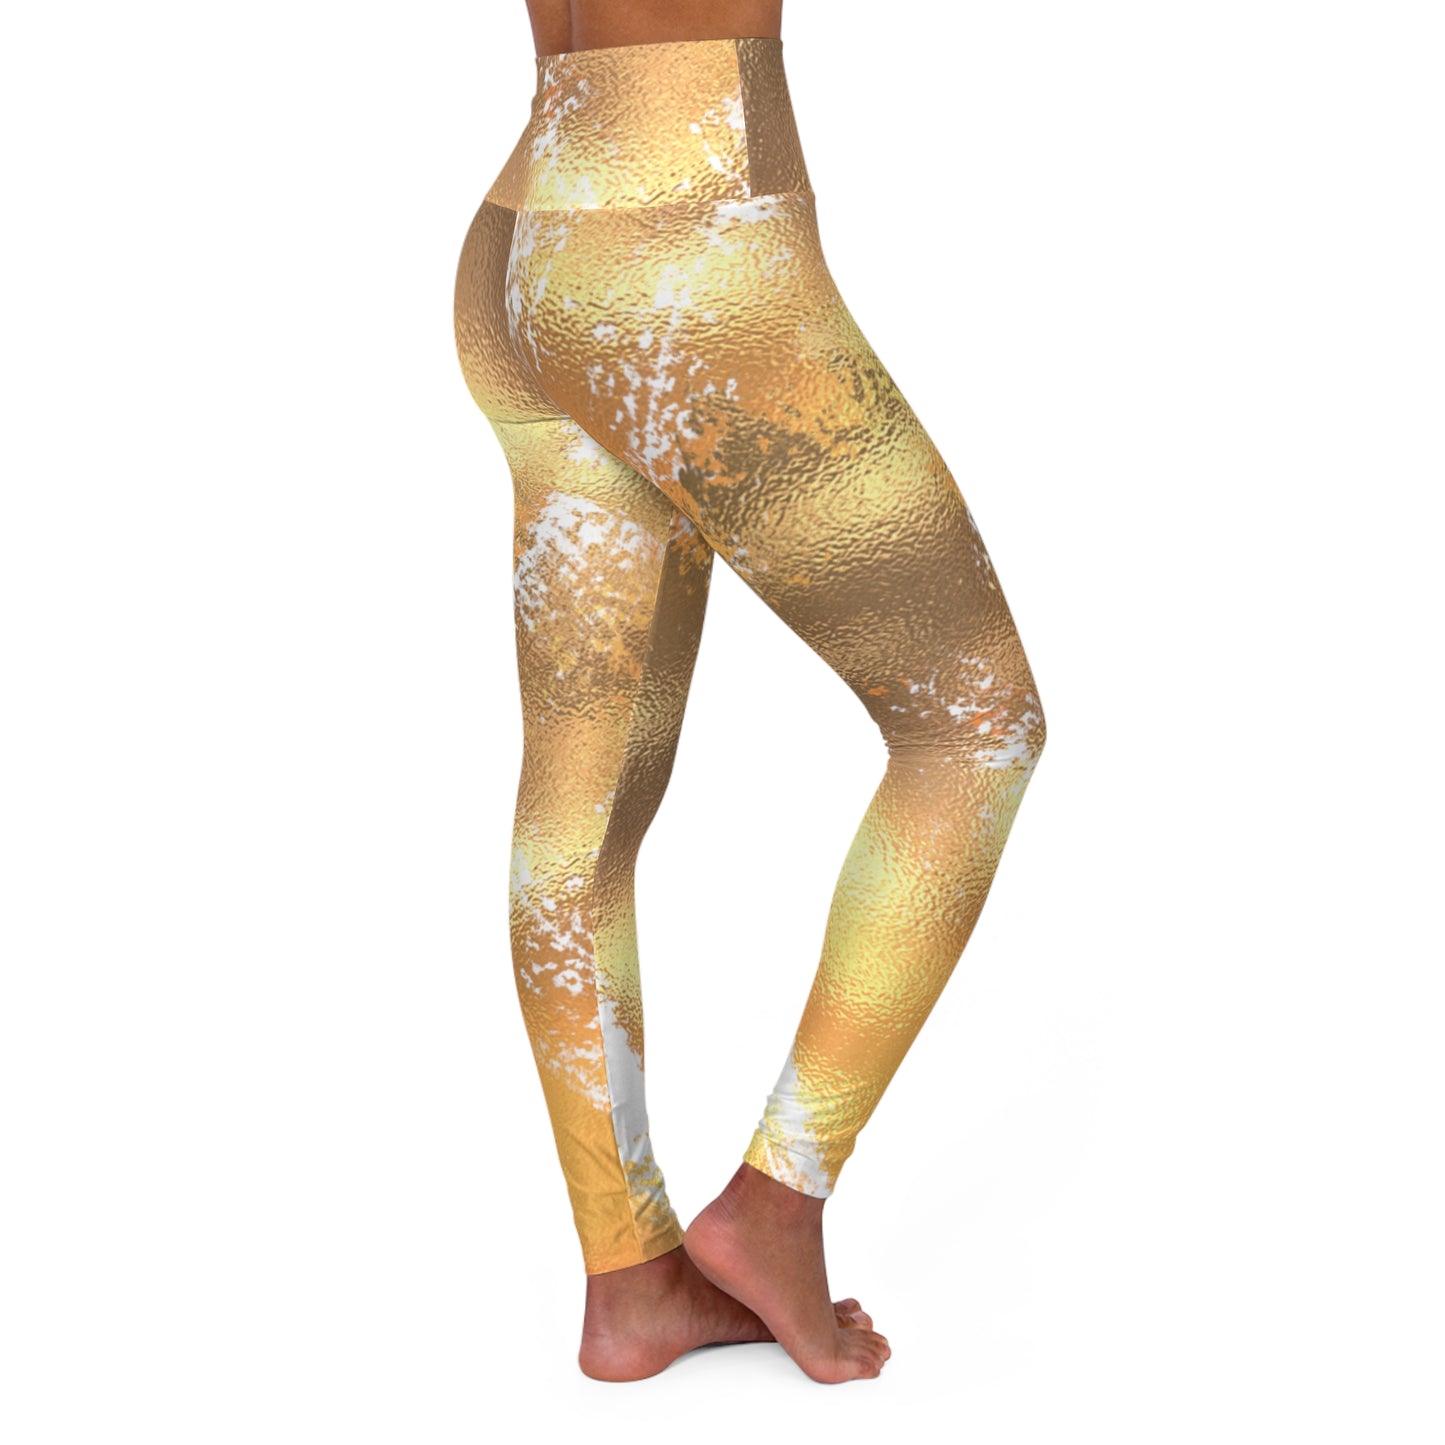 High Waisted Yoga Leggings Skinny fit, Double layer waistband, S-2XL. "Gold Collection"